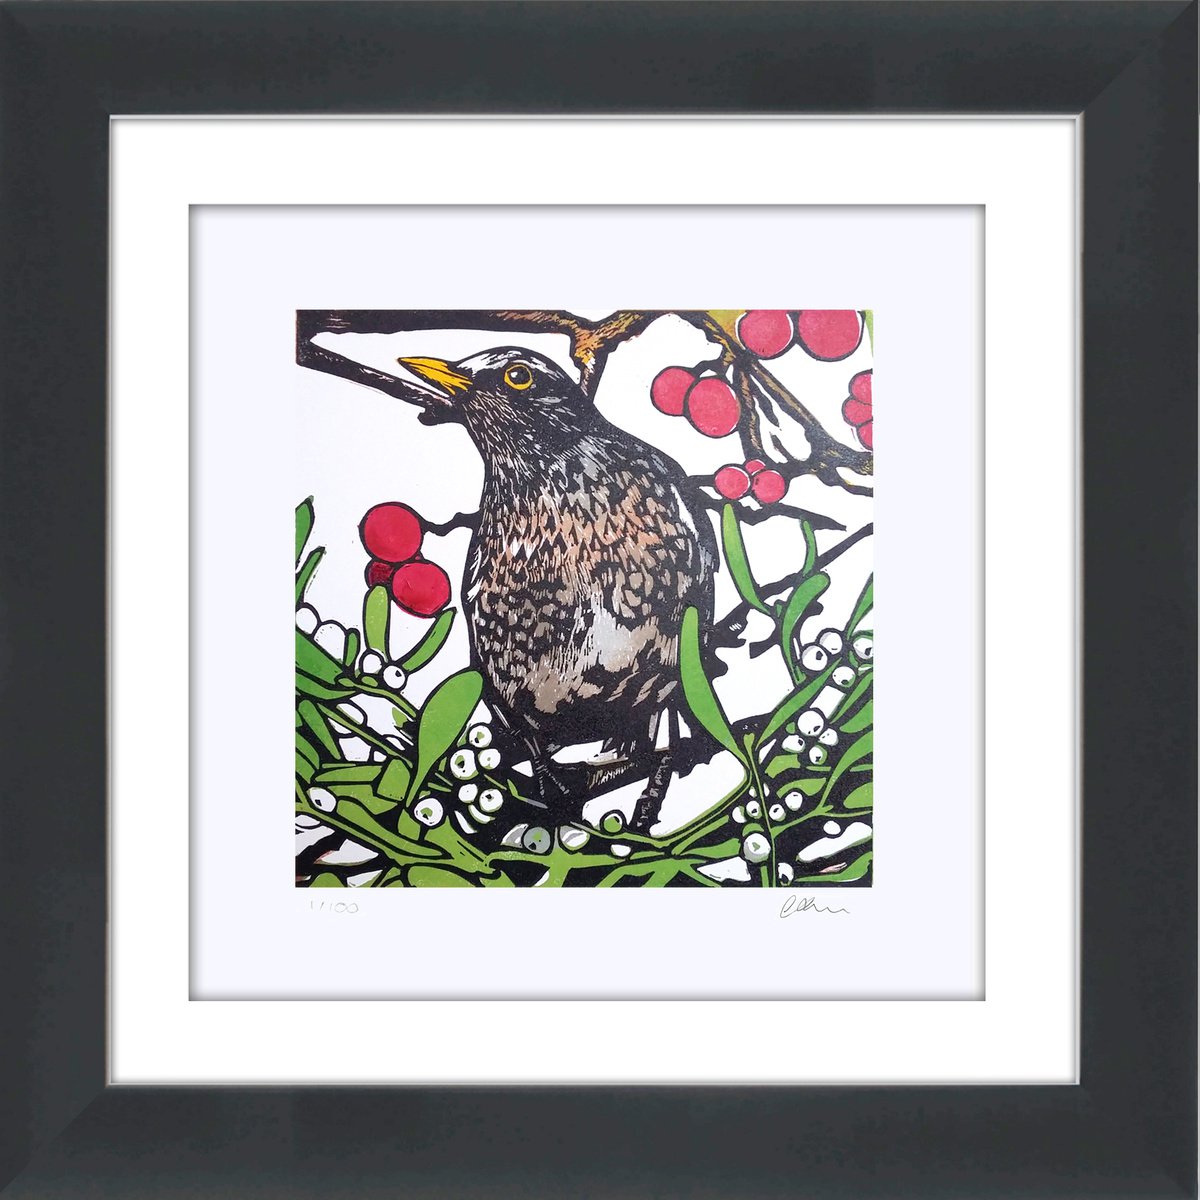 Redwing, red berries and mistletoe framed and ready to hang by Carolynne Coulson